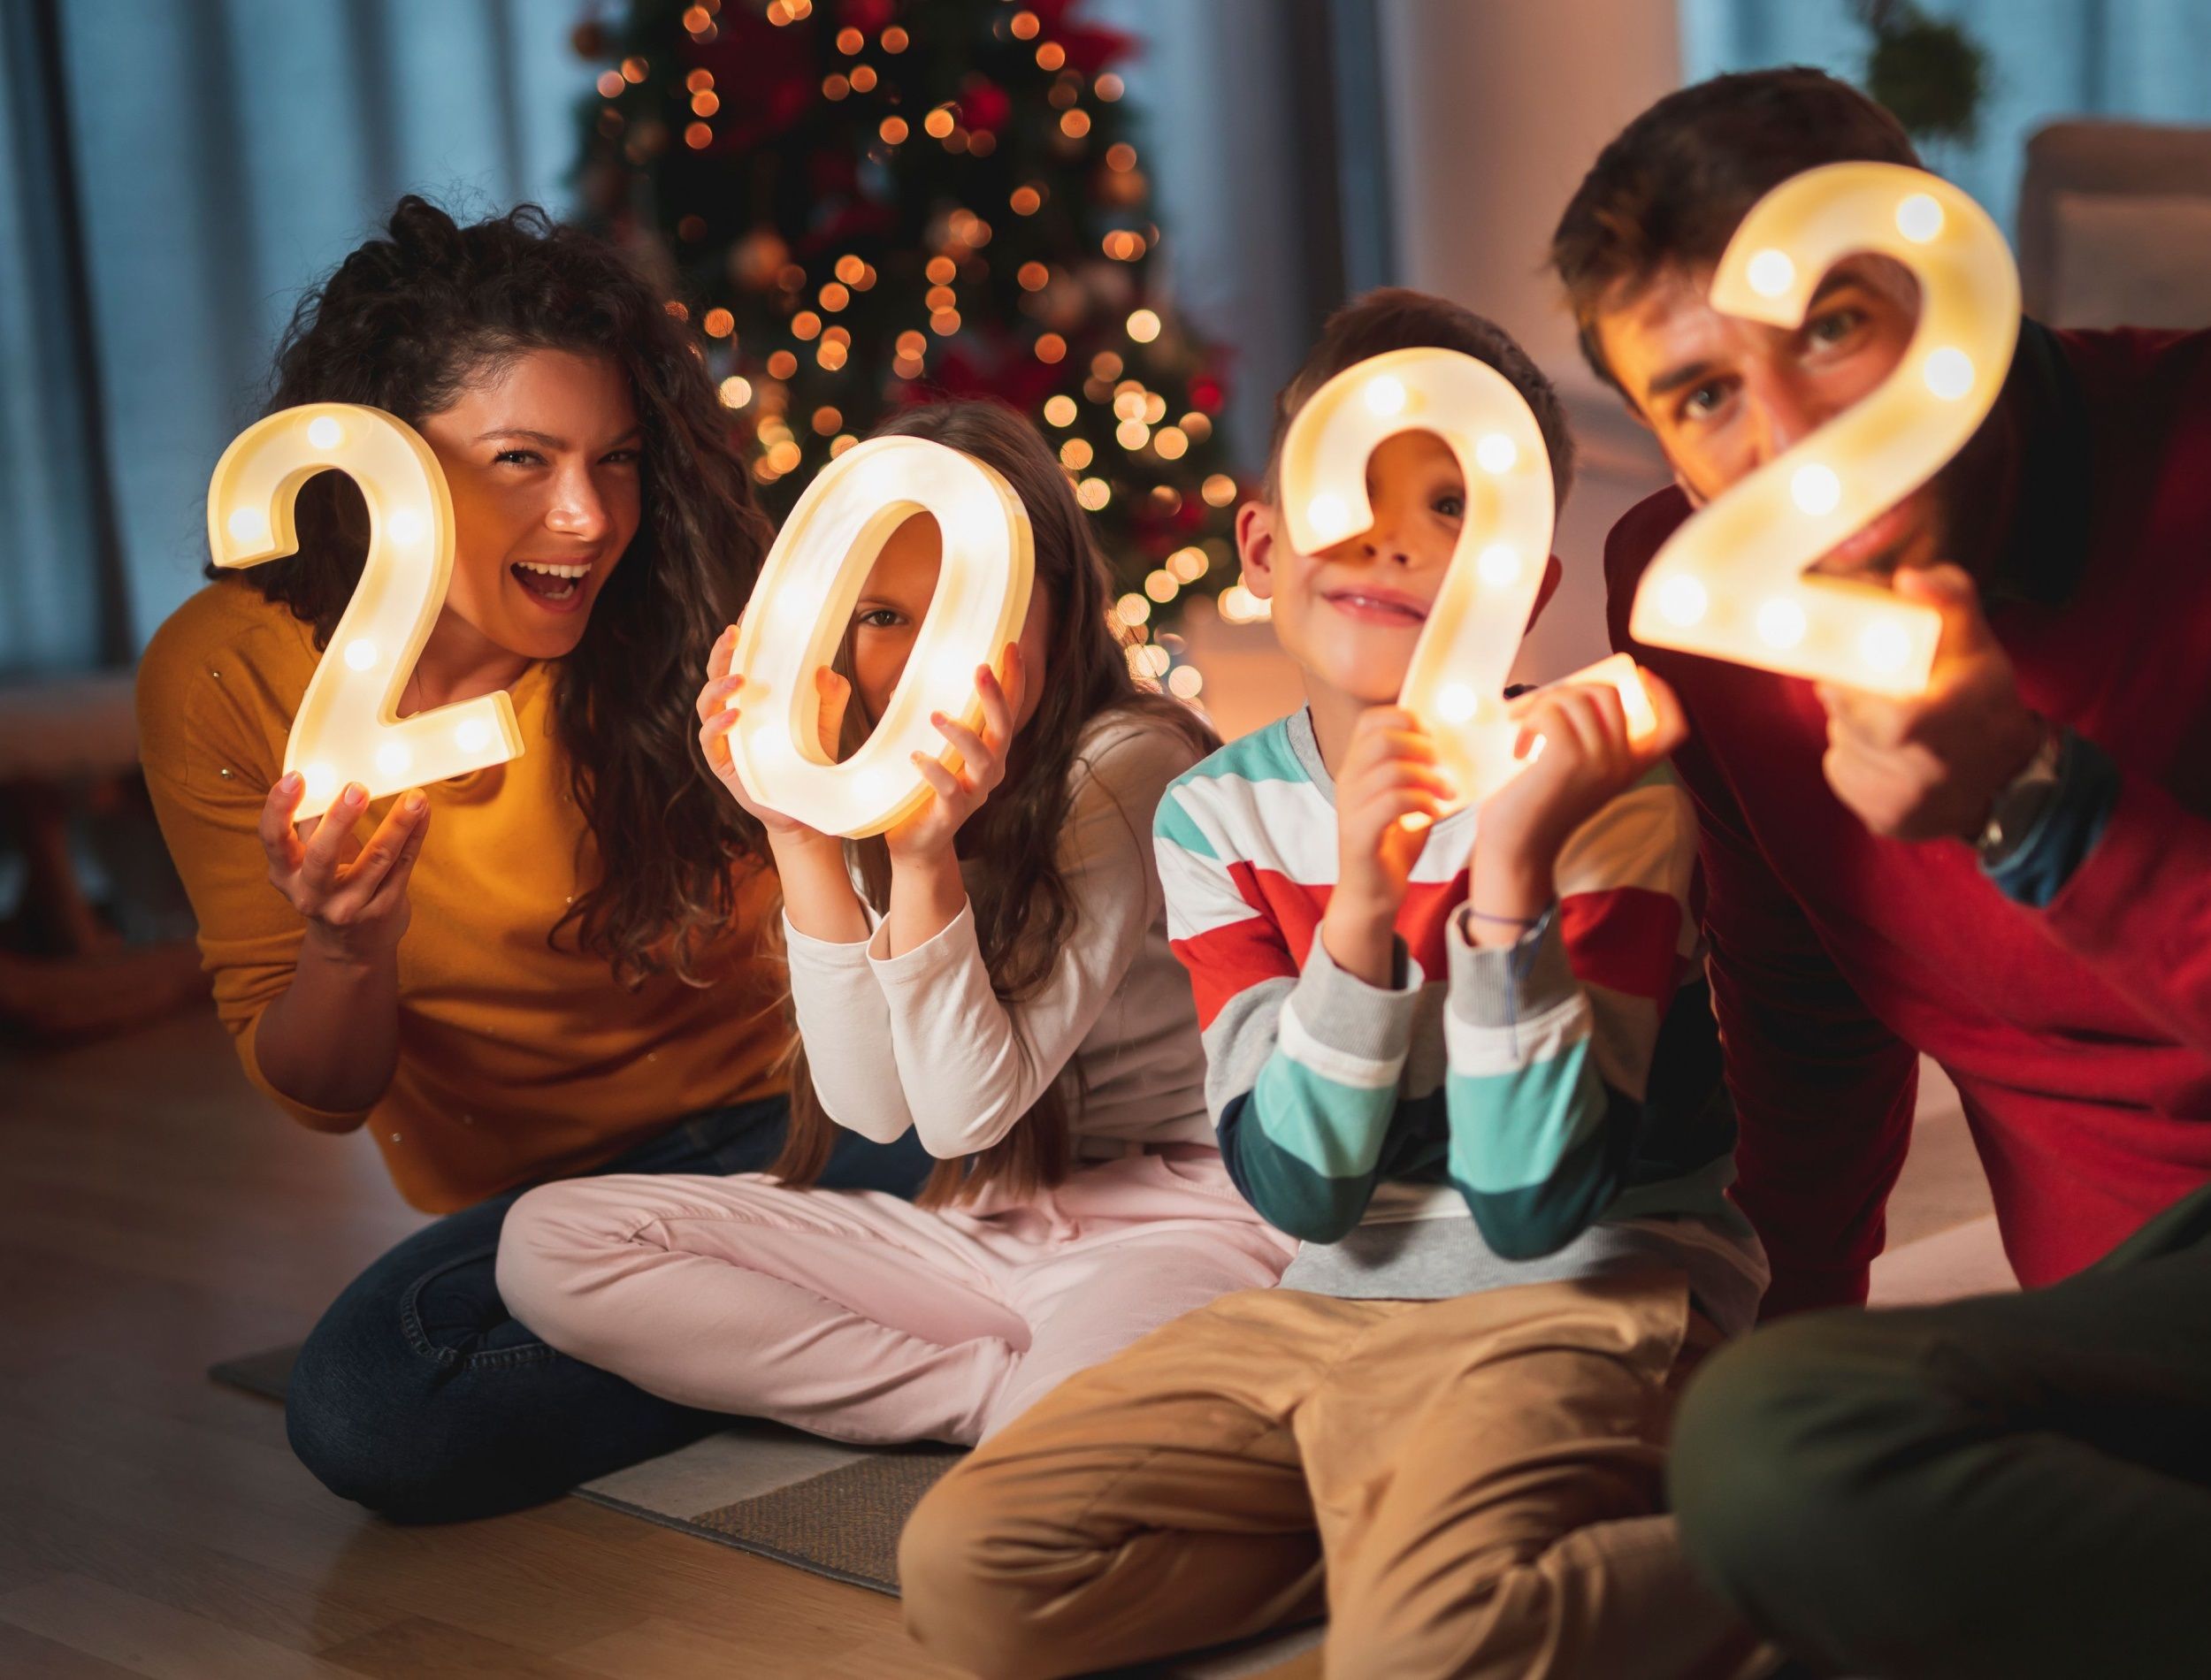 Happy family celebrating New Years Eve at home with kids, sitting by the Christmas tree, holding illuminative numbers 2022 representing the upcoming New Year